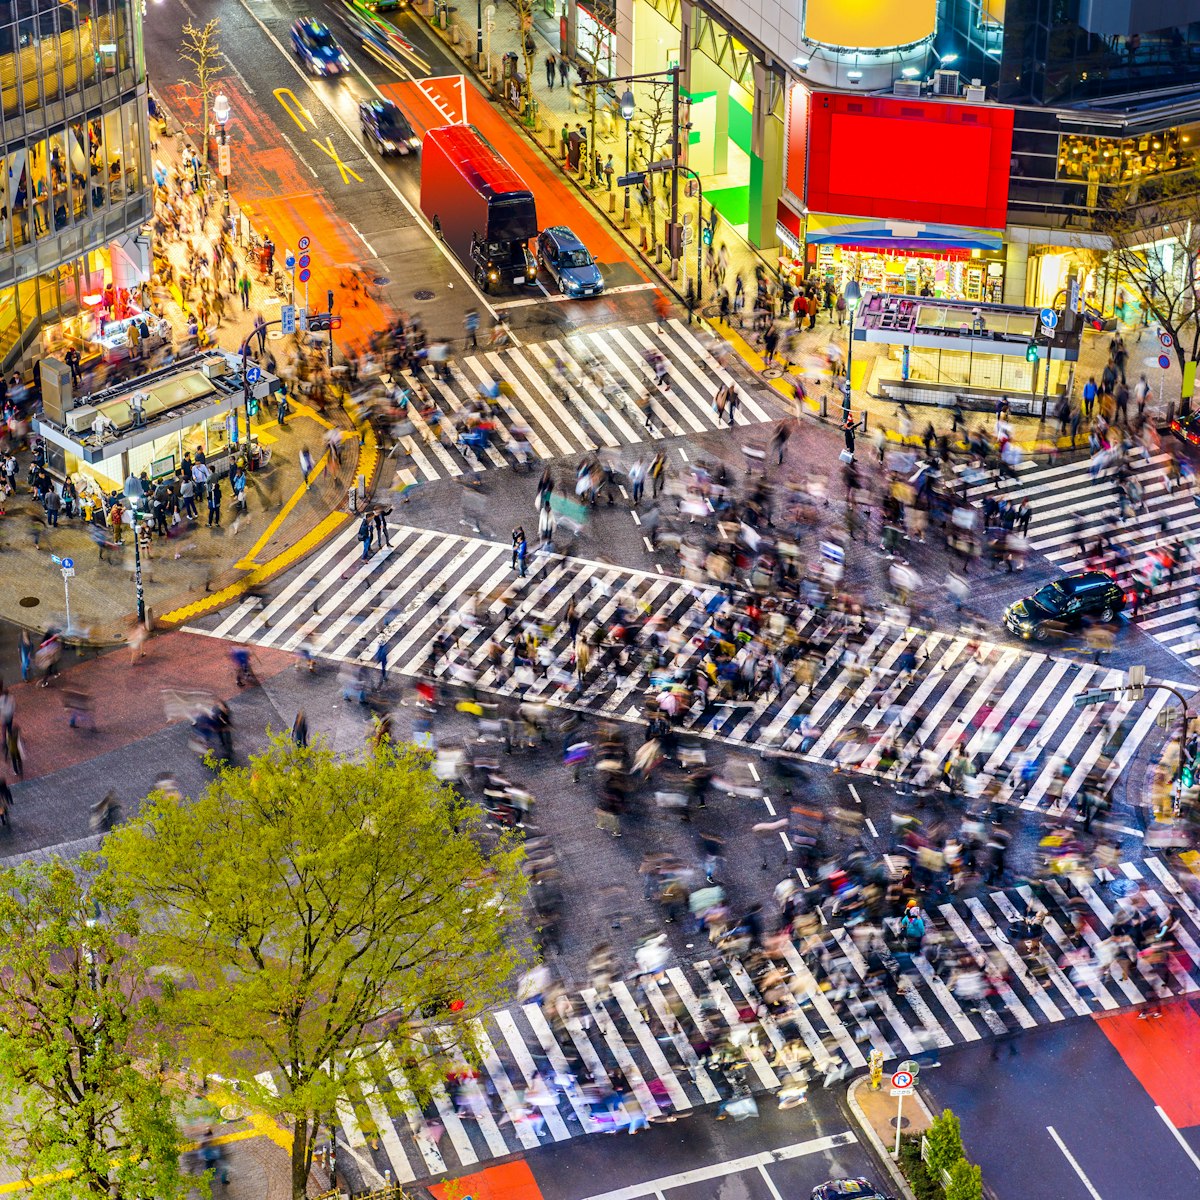 Tokyo, Japan view of Shibuya Crossing, one of the busiest crosswalks in the world.
aerial, architecture, asia, asian, billboards, buildings, business, city, cityscape, commercial, cross, crosswalk, crowd, district, downtown, dusk, evening, famous, futuristic, japan, japanese, landmark, lights, location, metropolis, metropolitan, modern, morning, night, office, pedestrian, people, place, plaza, road, scene, scenery, scenic, shibuya, shopping, signs, skyline, skyscrapers, square, street, tokyo, twilight, urban, view, walk